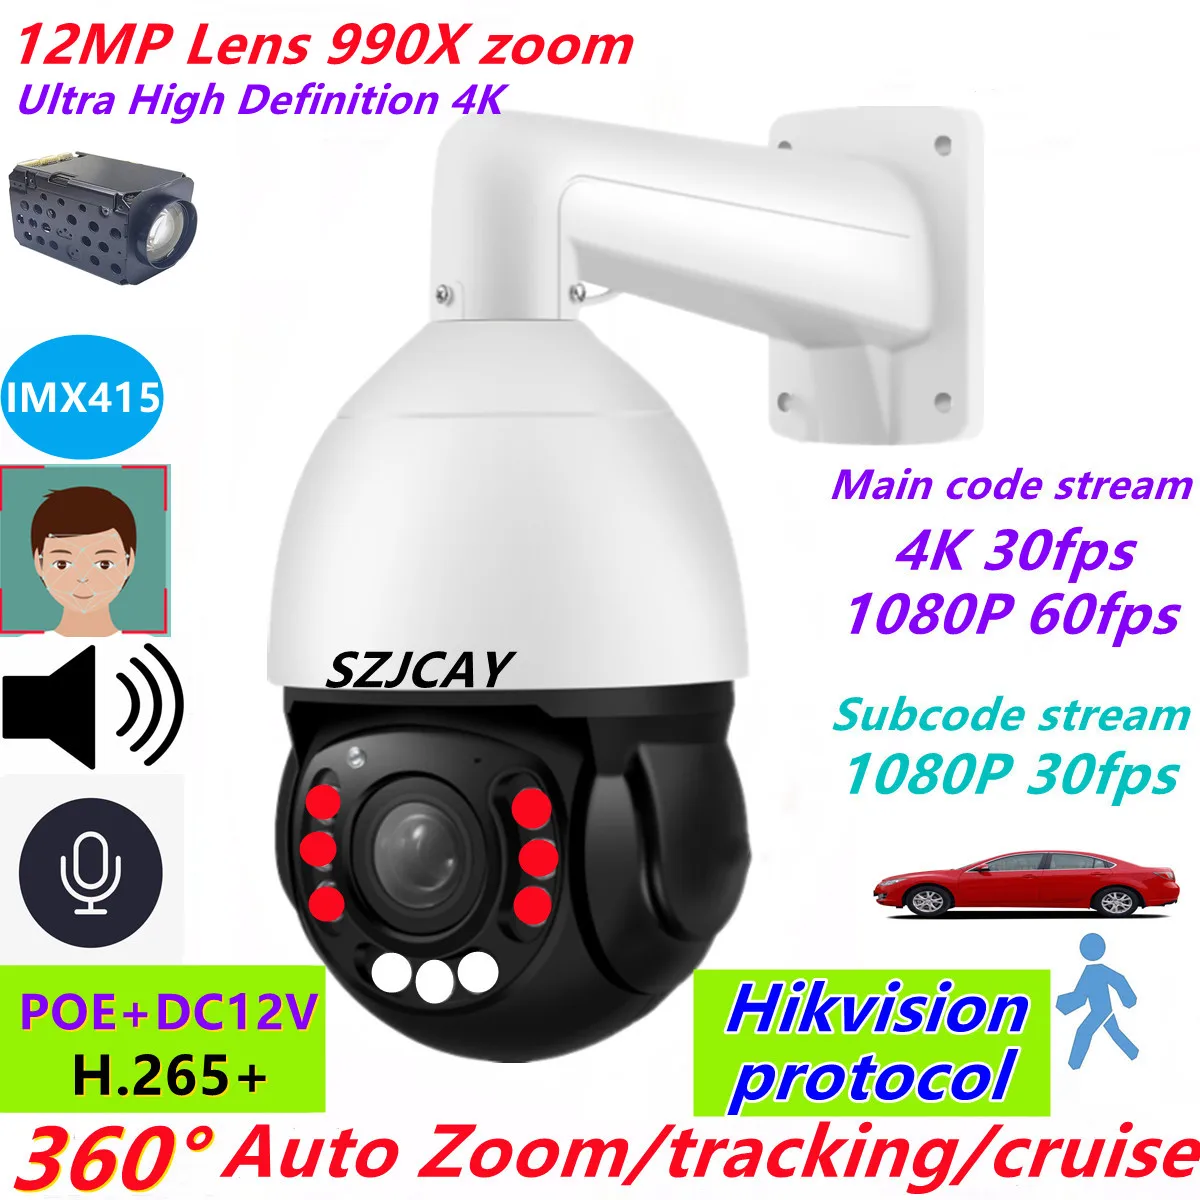 12MP 4K PTZ POE Zoom IP Camera Hikvision Protocol Outdoor Color Automatic Tracking Video Security High Speed Dome PTZ Camera 12mp 4k 990x zoom wifi ip camera 4g sim card outdoor color automatic tracking video security high speed dome ptz 8mp poe camera